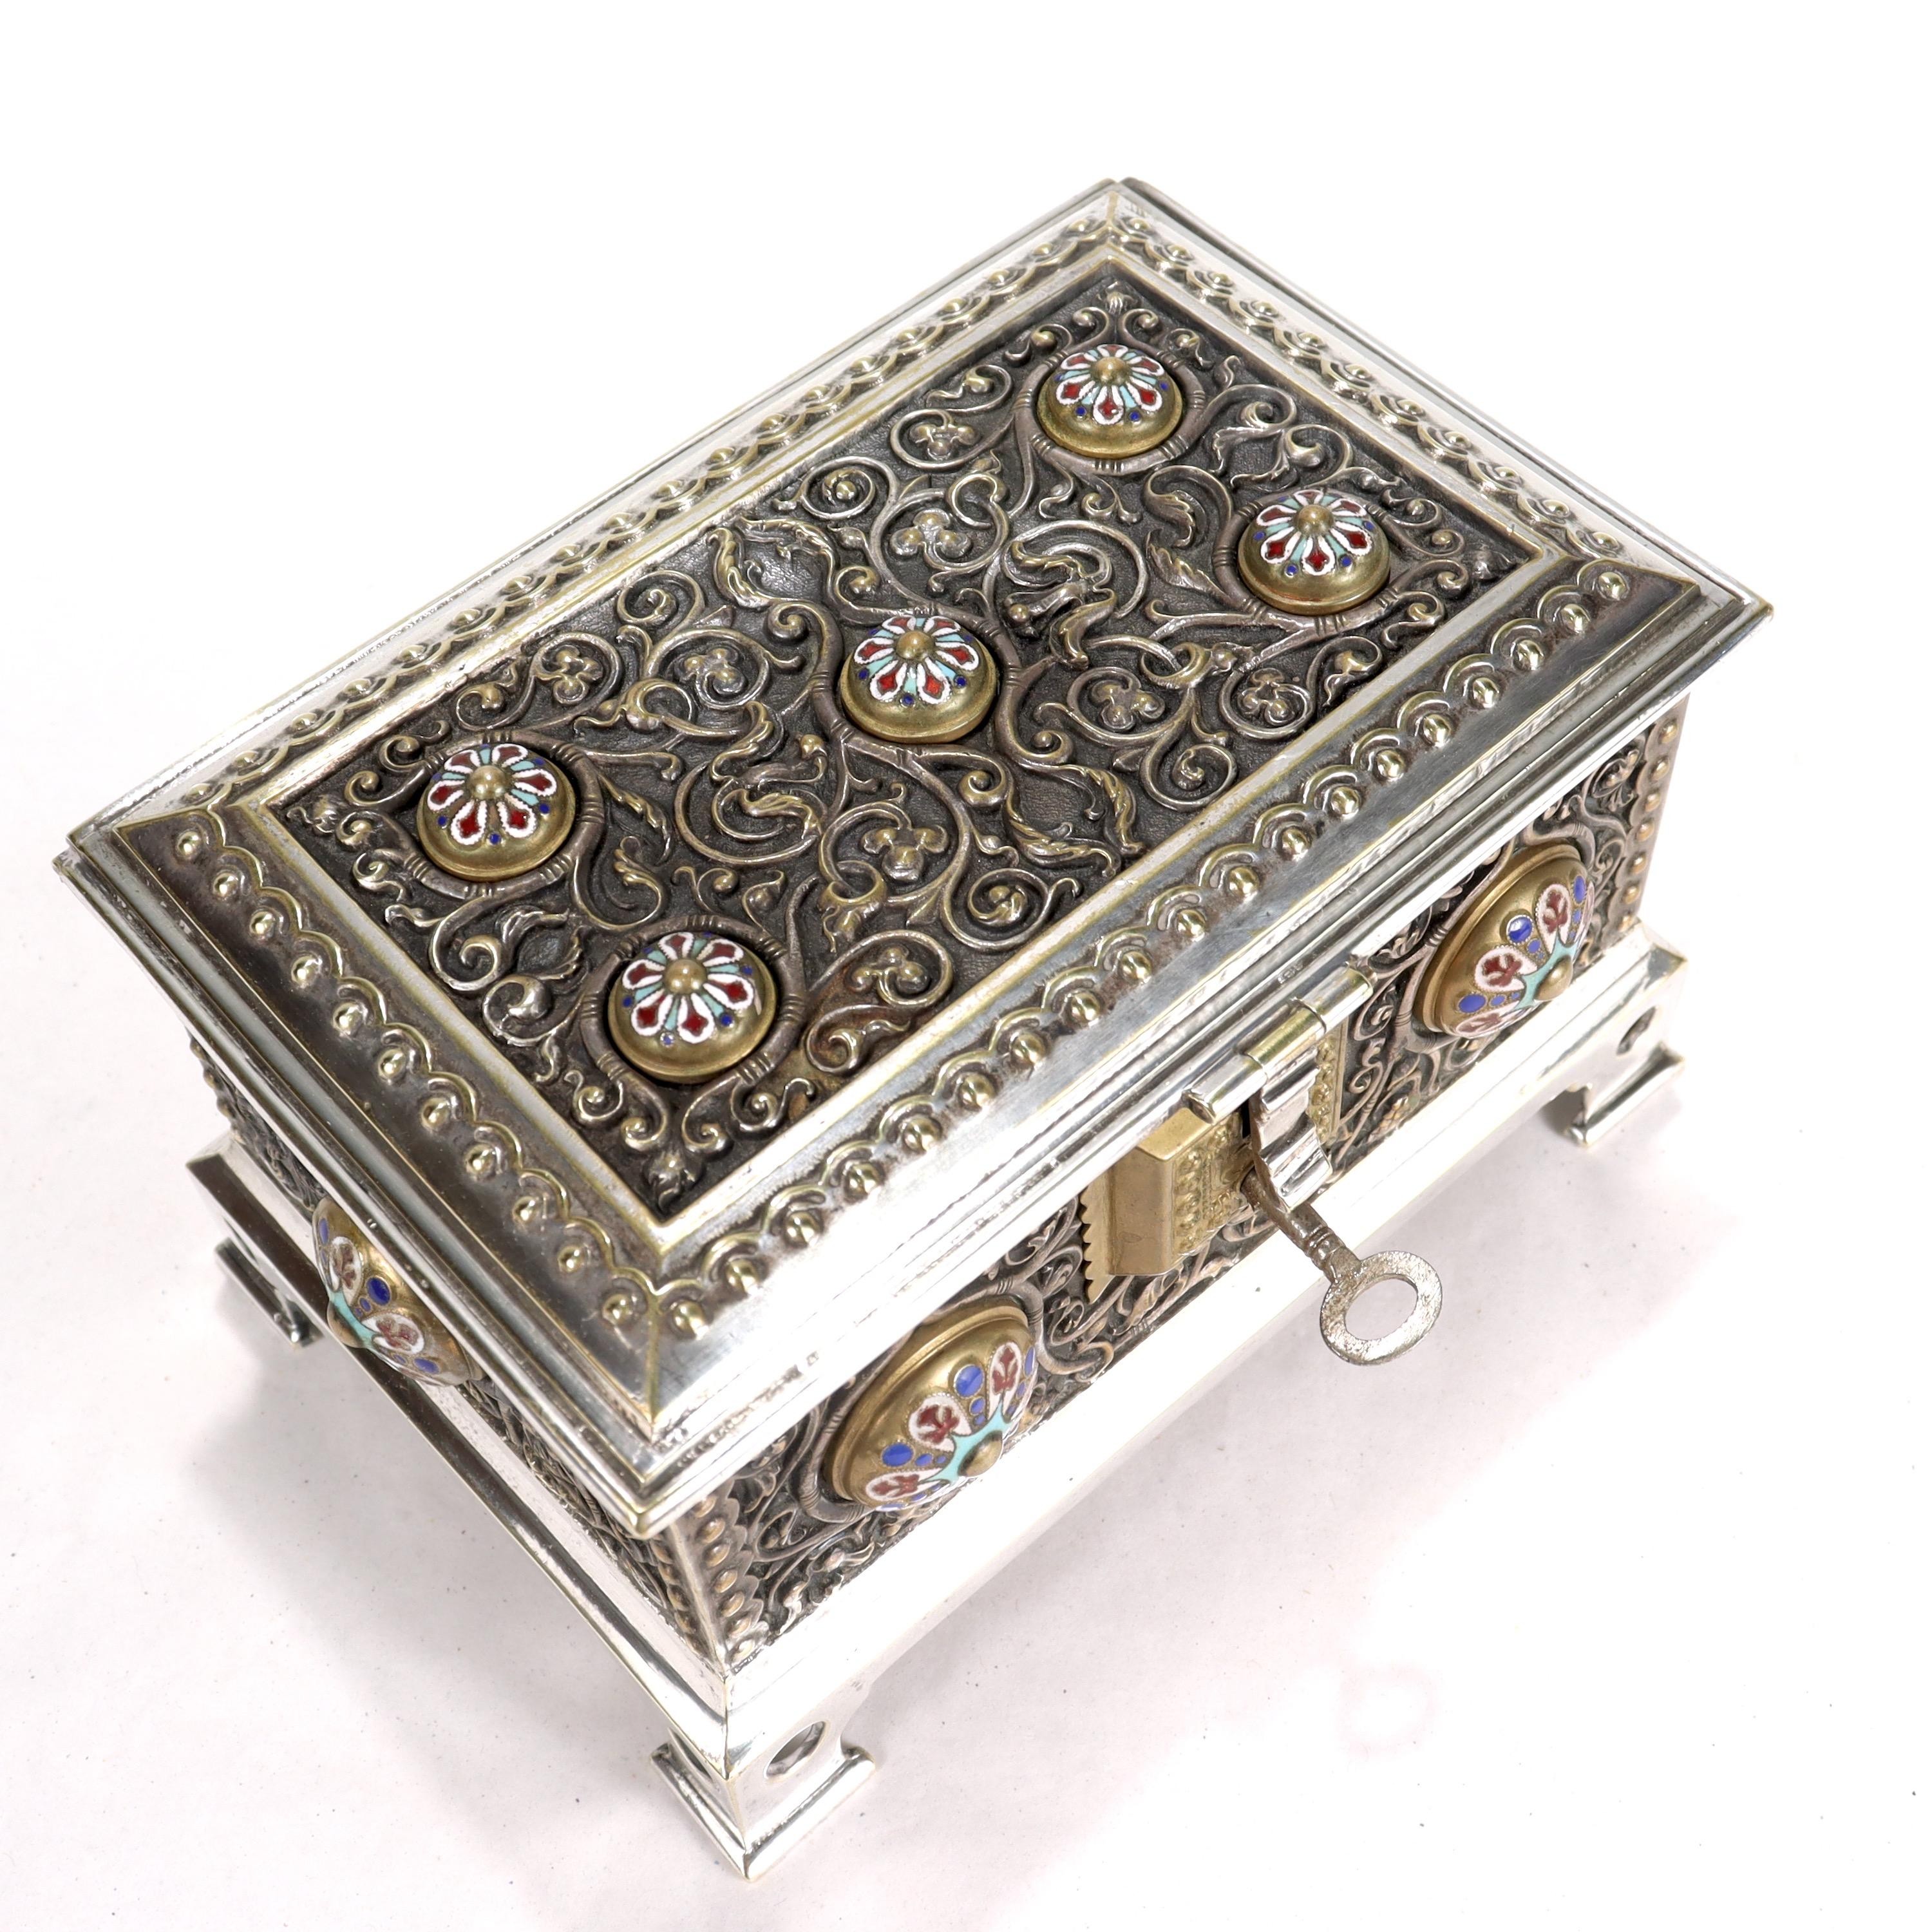 Antique Silver Plated & Enameled Table Box or Casket in the Russian Taste For Sale 6